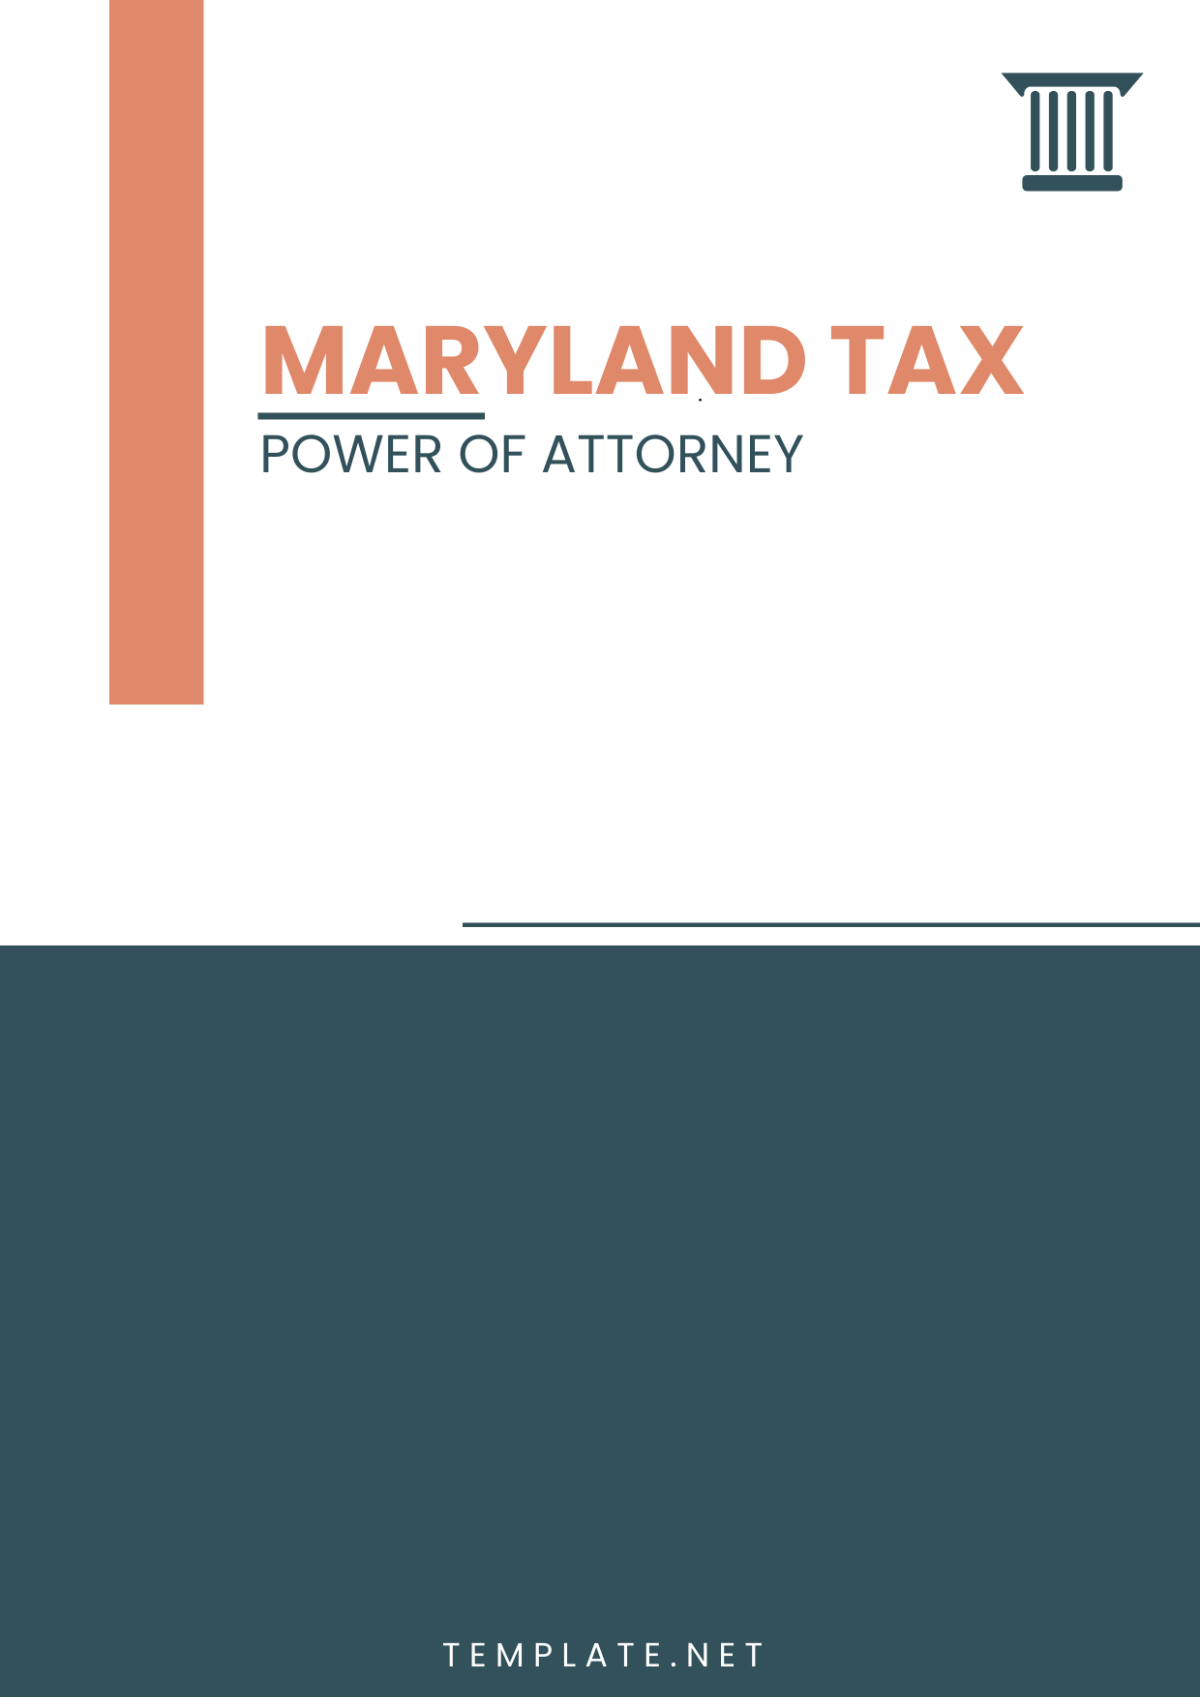 Maryland Tax Power of Attorney Template